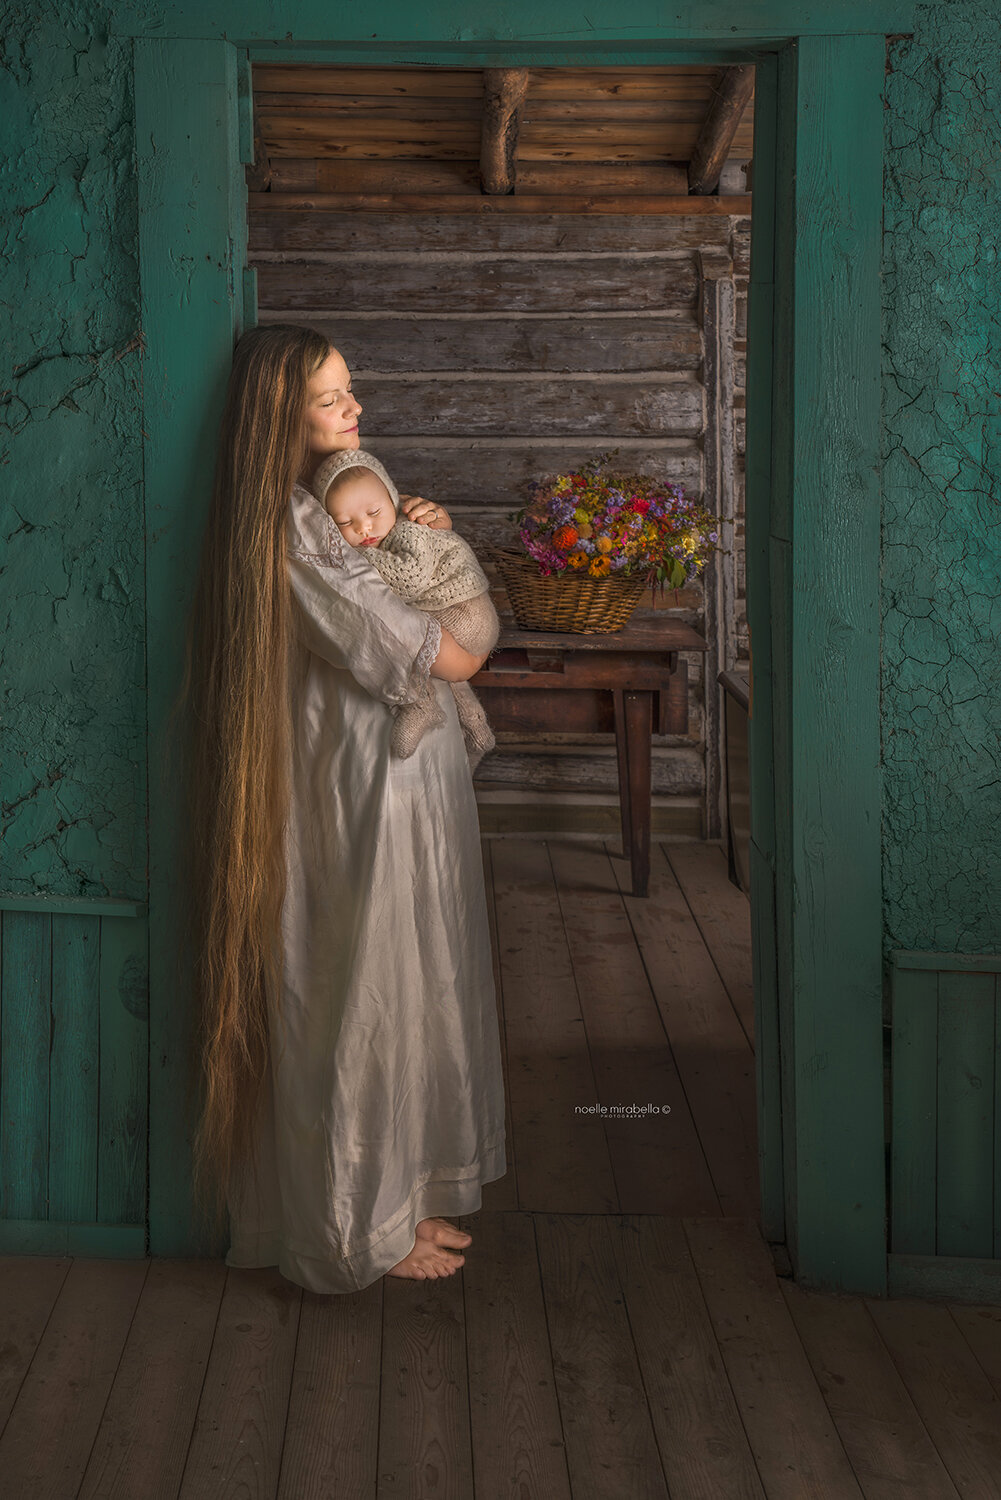 Mother holding baby in doorway of 100-year-old house.